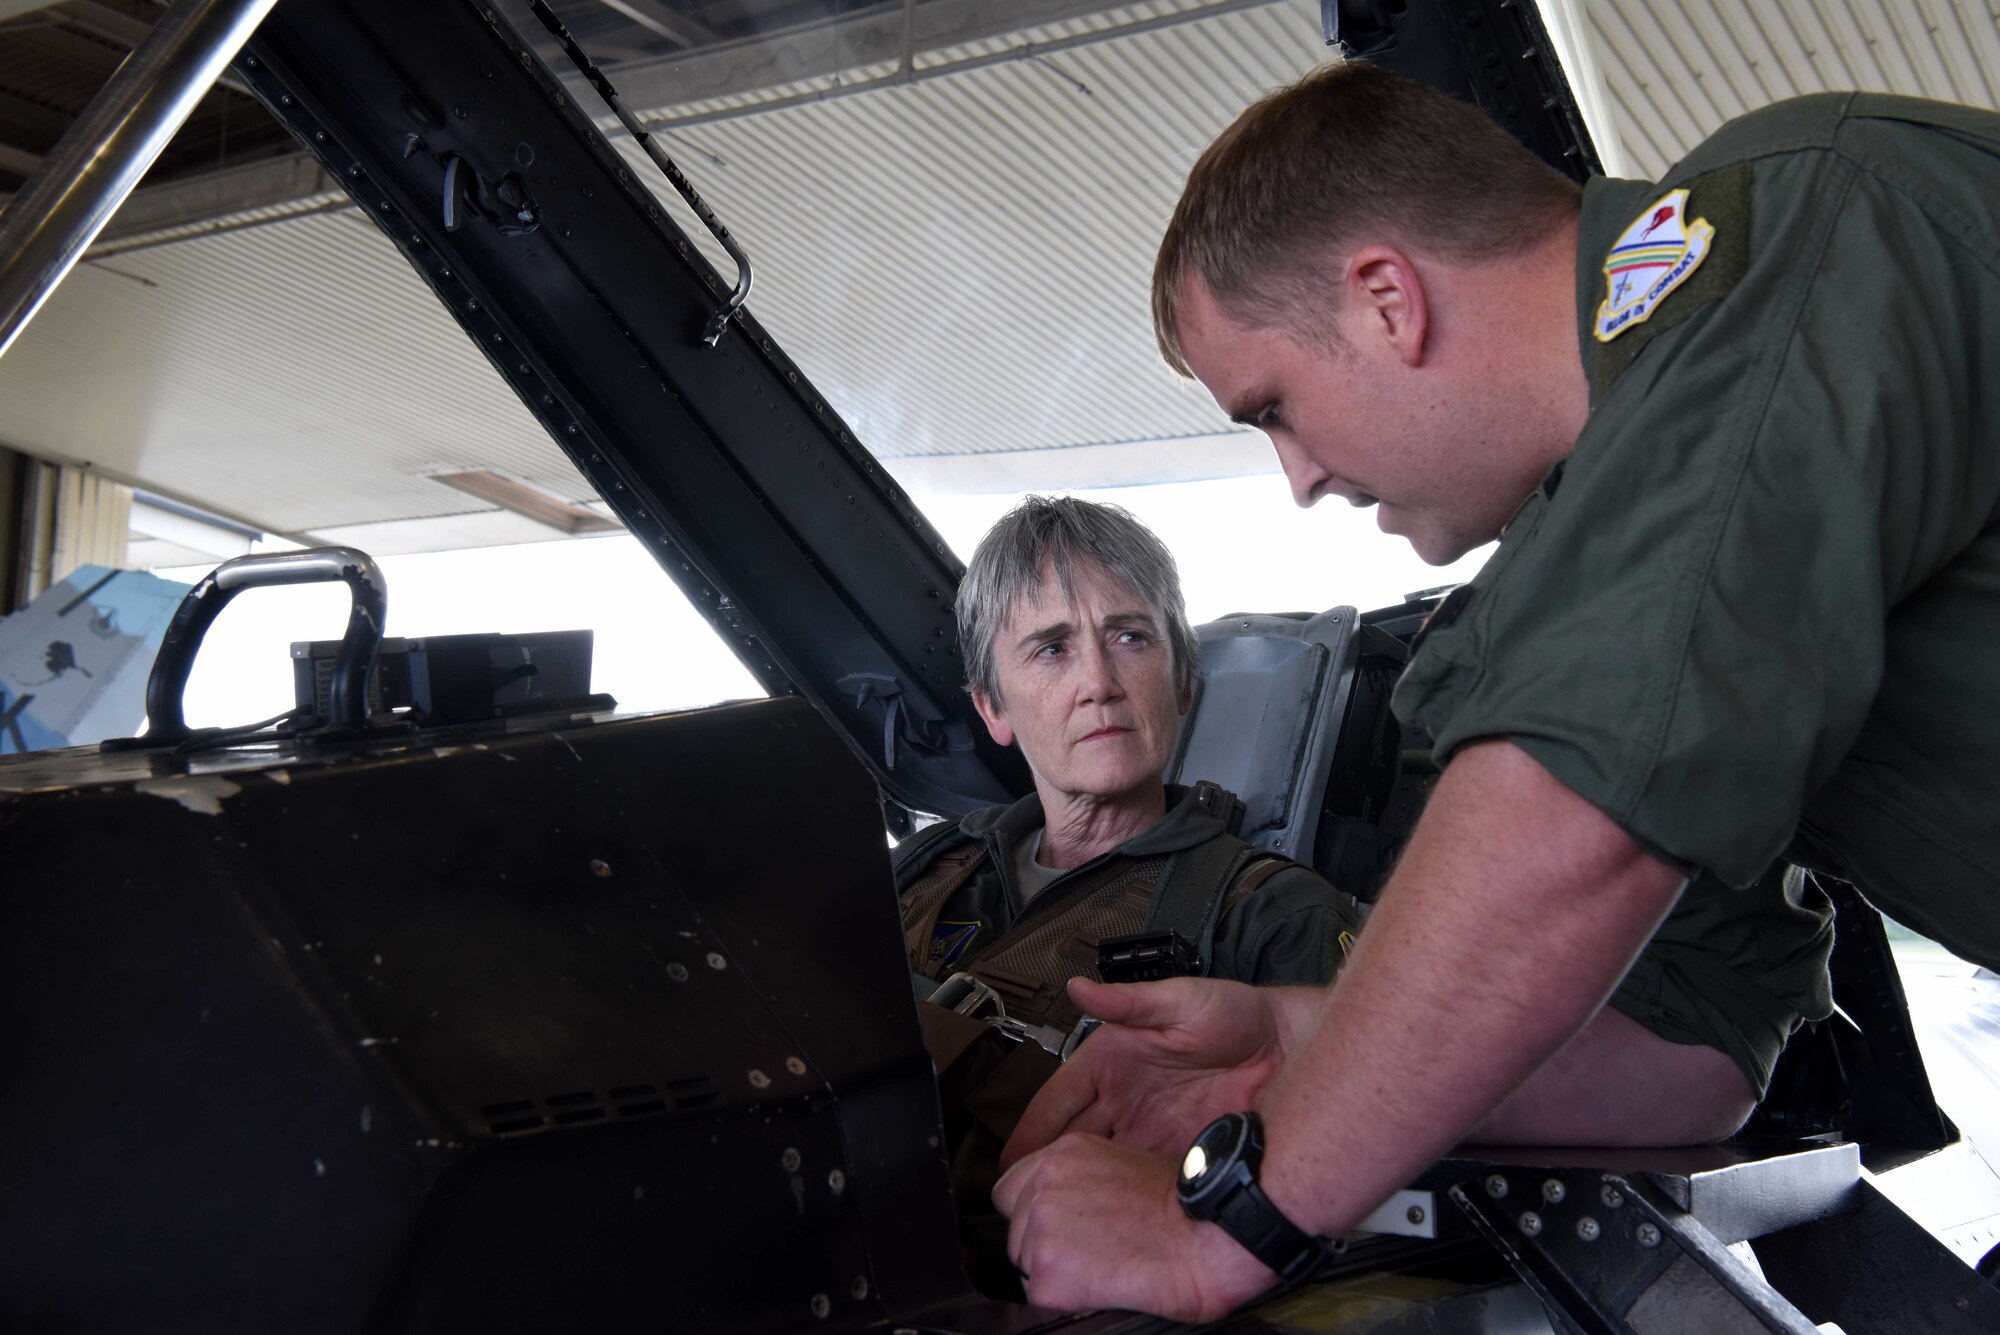 A 354th Fighter Wing Airman briefs the Honorable Heather A. Wilson, the Secretary of the Air Force, before her flight Aug. 10, 2018, at Eielson Air Force Base, Alaska. The brief teaches passengers the emergency procedures for the F-16D Fighting Falcon. (U.S. Air Force photo by Airman 1st Class Eric M. Fisher)